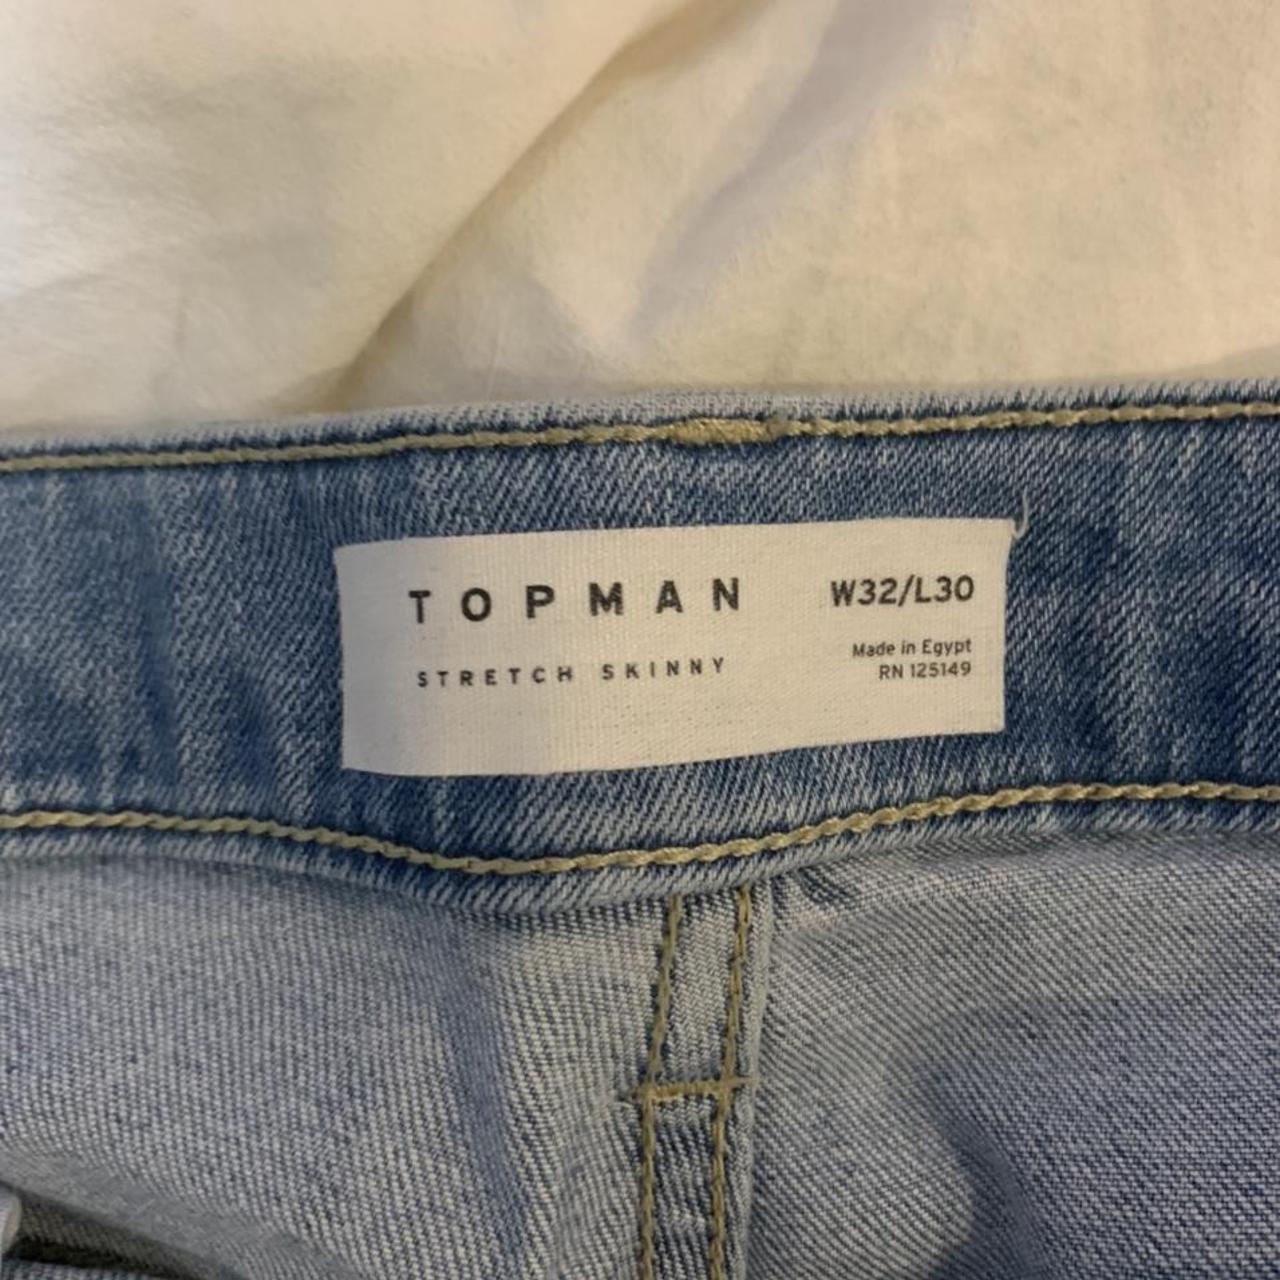 Top man mens jeans Really tiny mark on knee would... - Depop